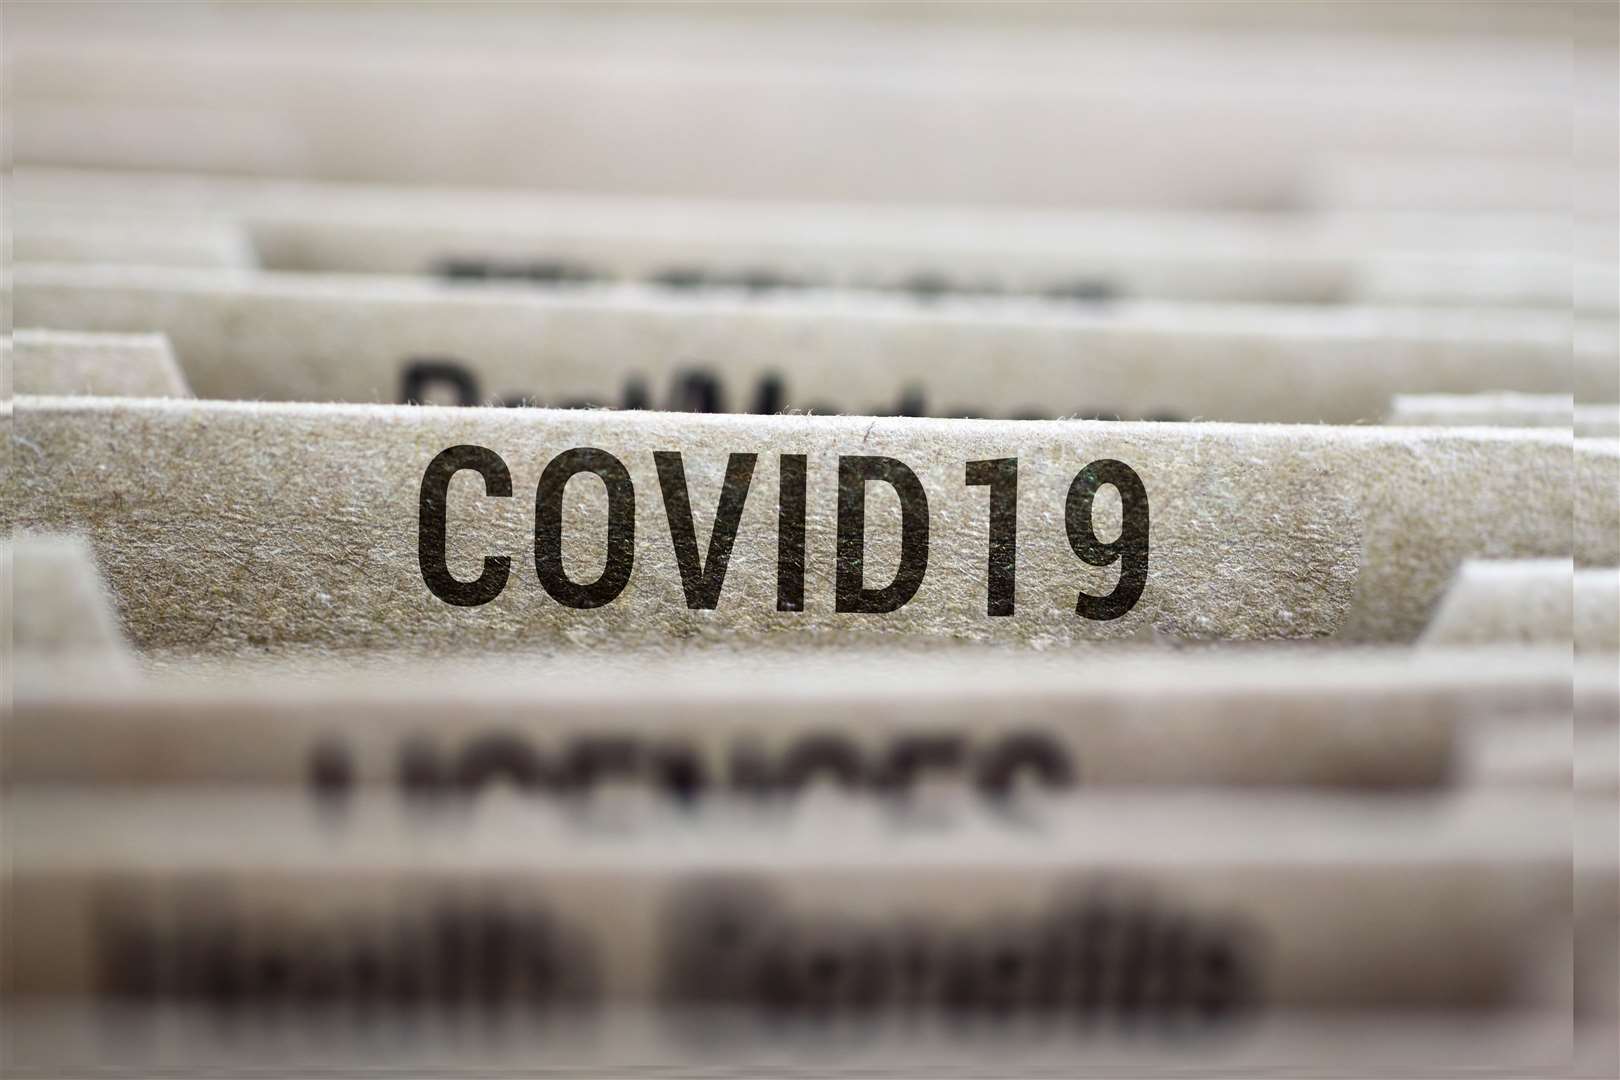 Covid-19 has caused people to empty the shelves of stores across the county